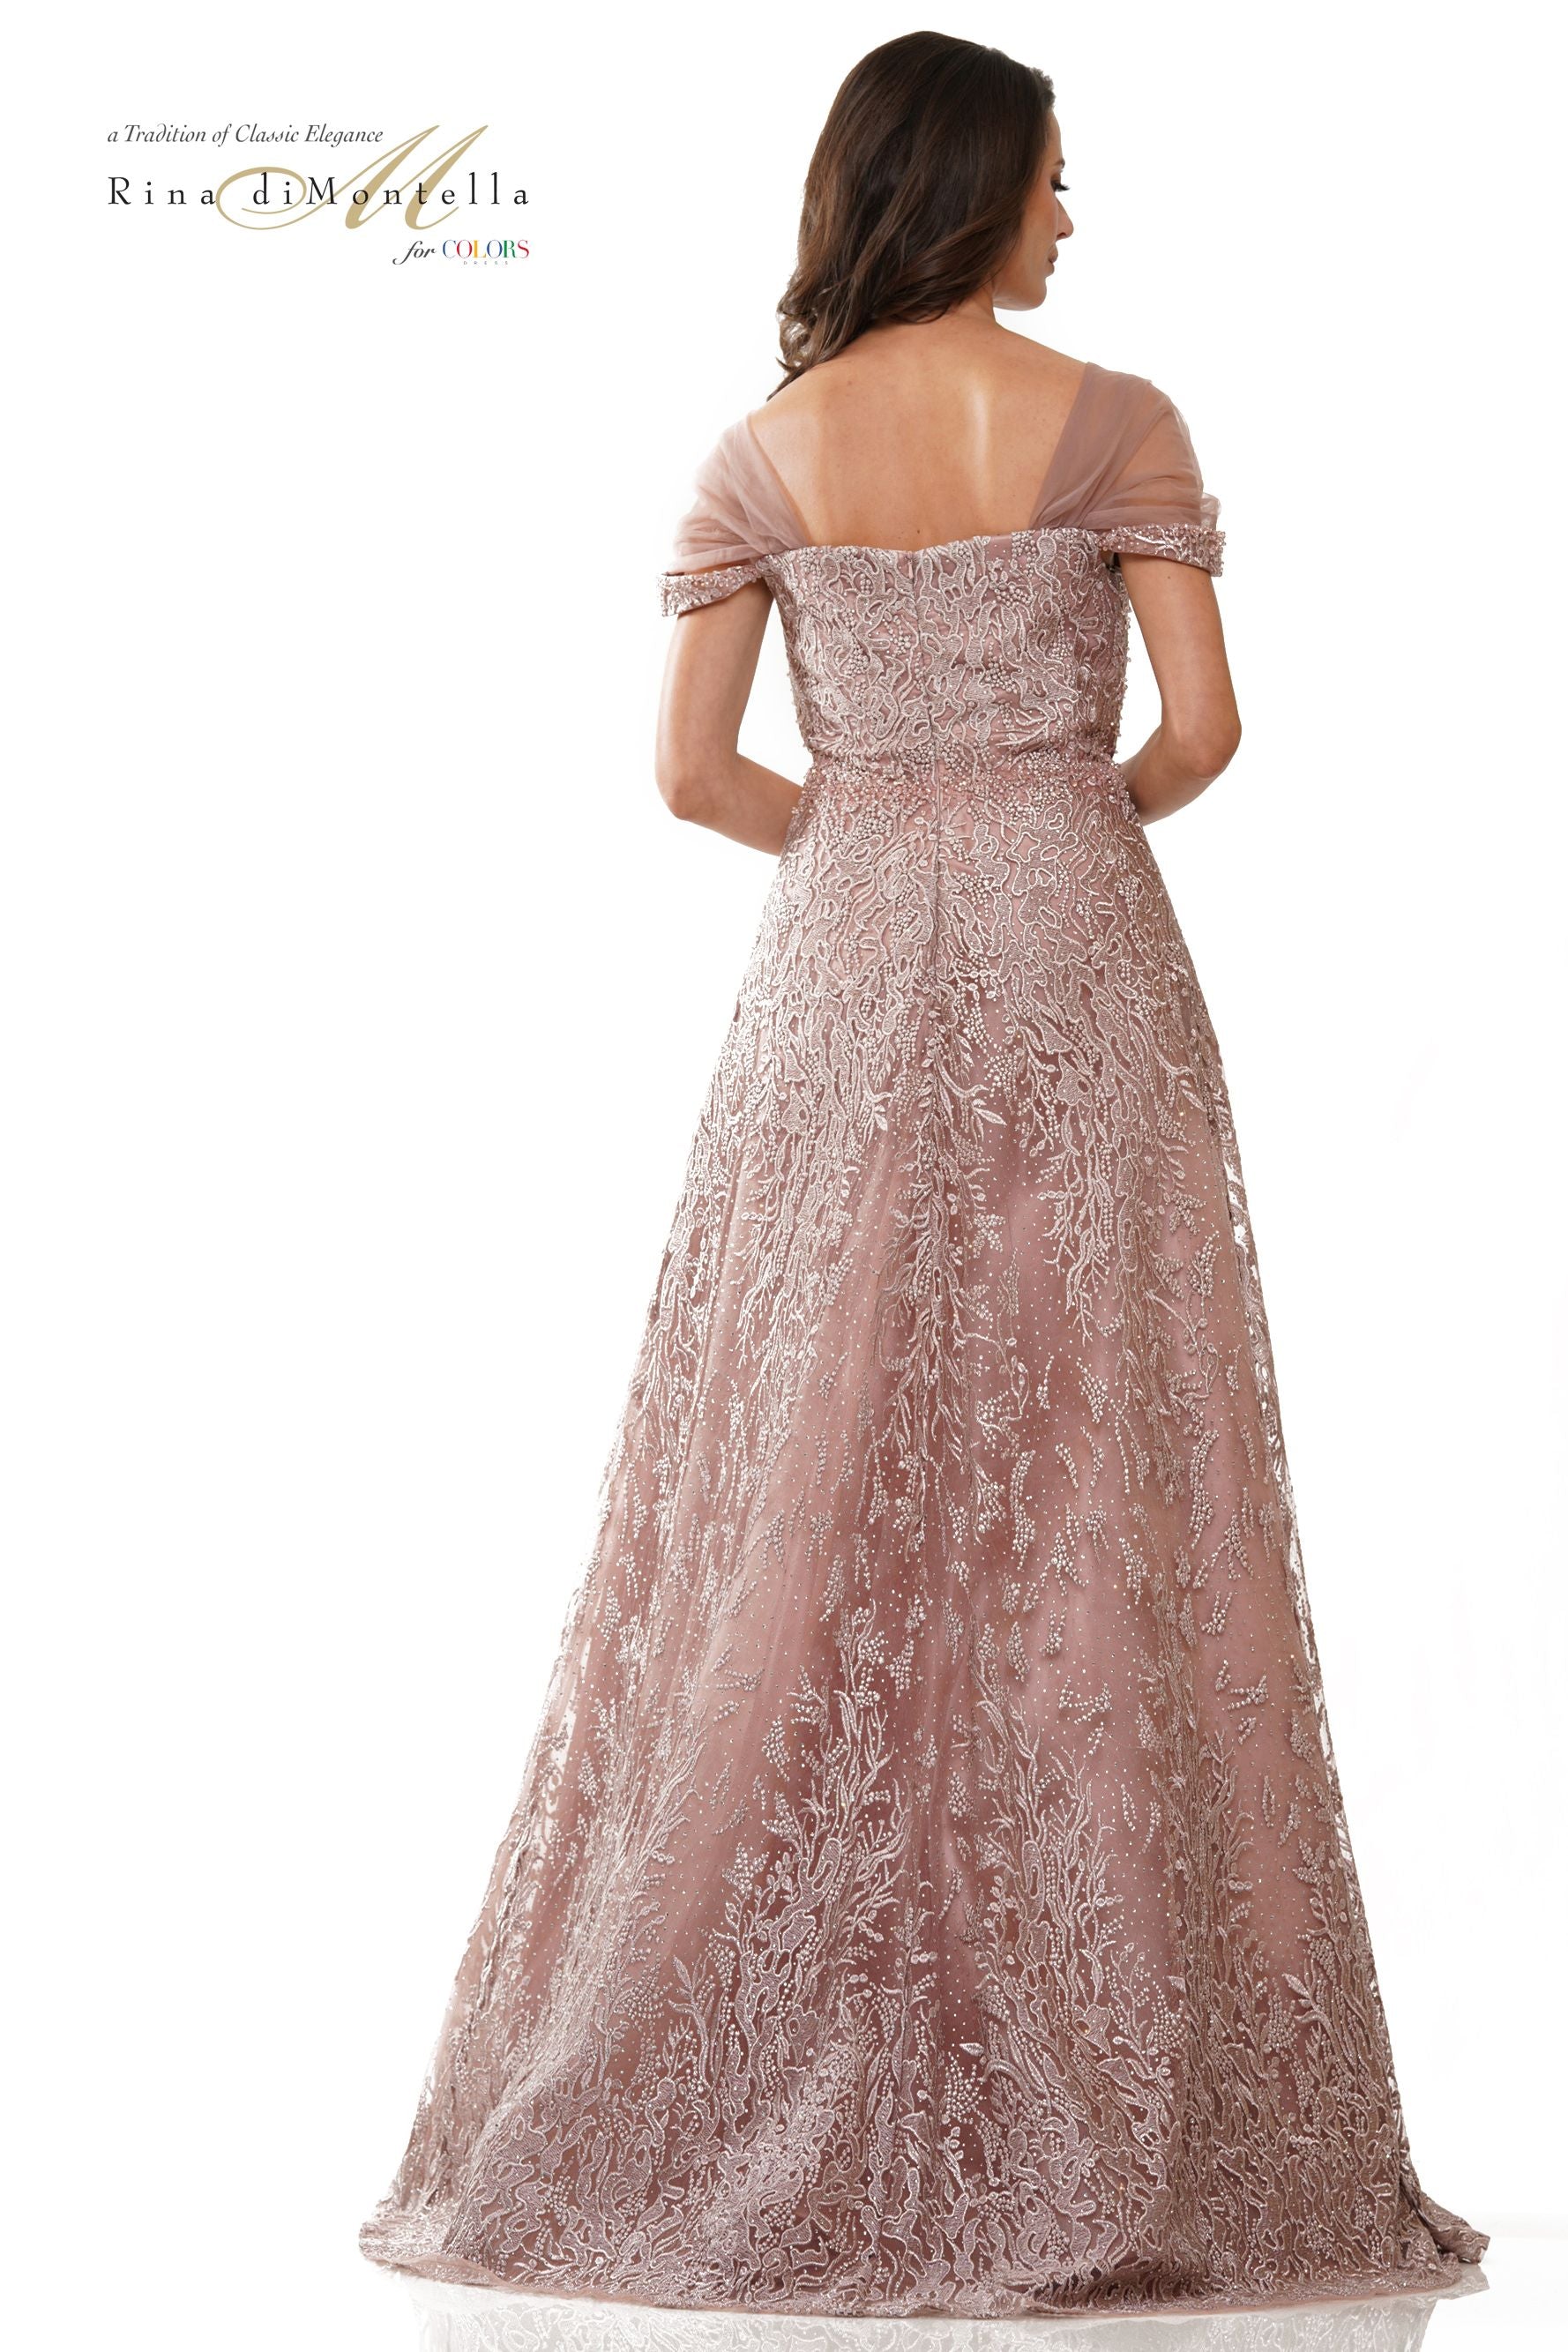 Rina Di Montella Embroidery Sweetheart A-Line Long Gown -RD2902